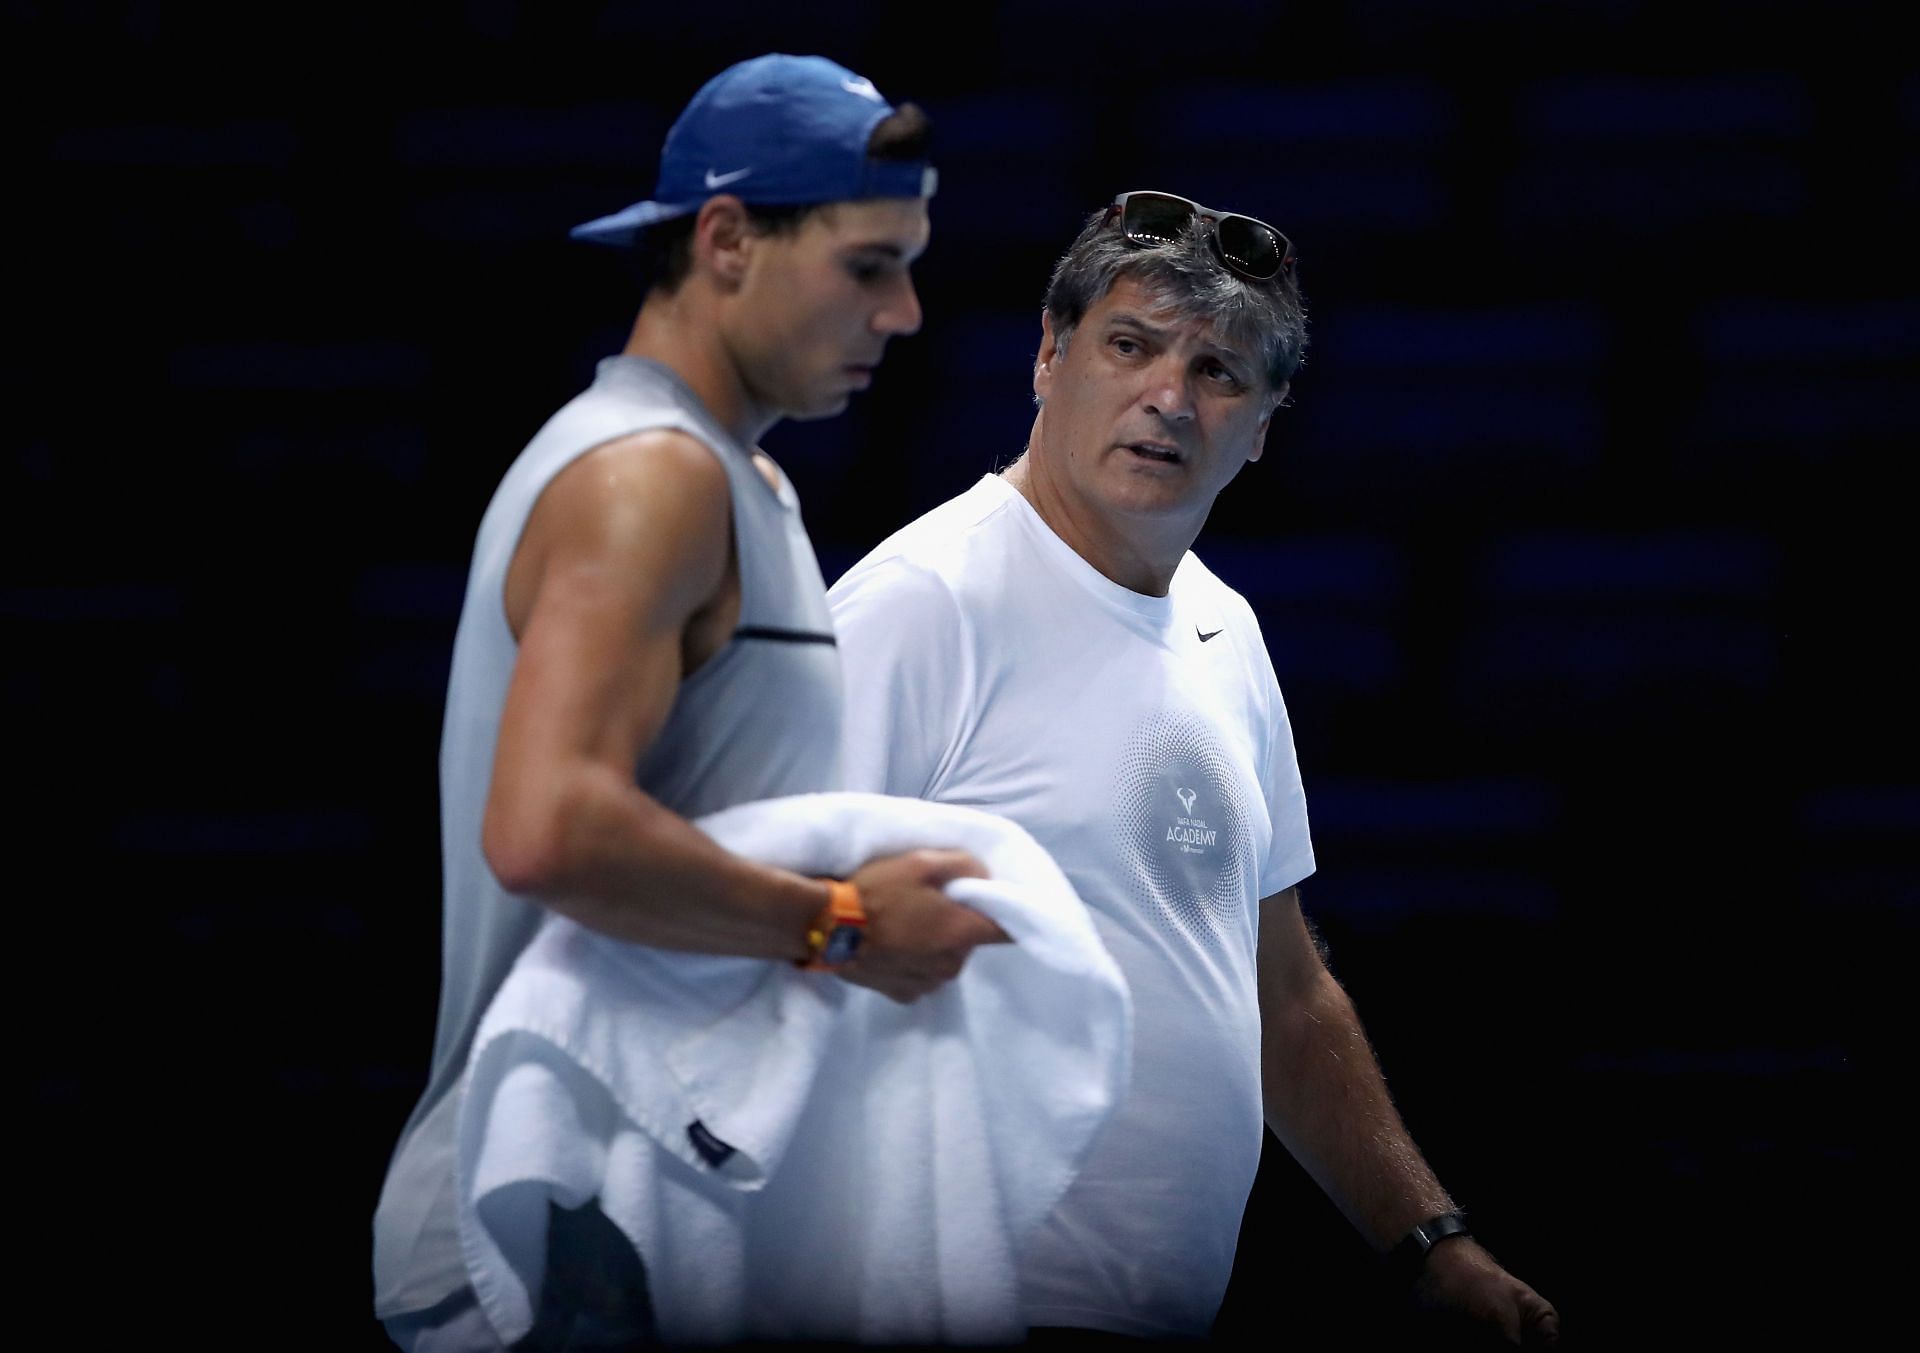 Rafael Nadal with his uncle Toni